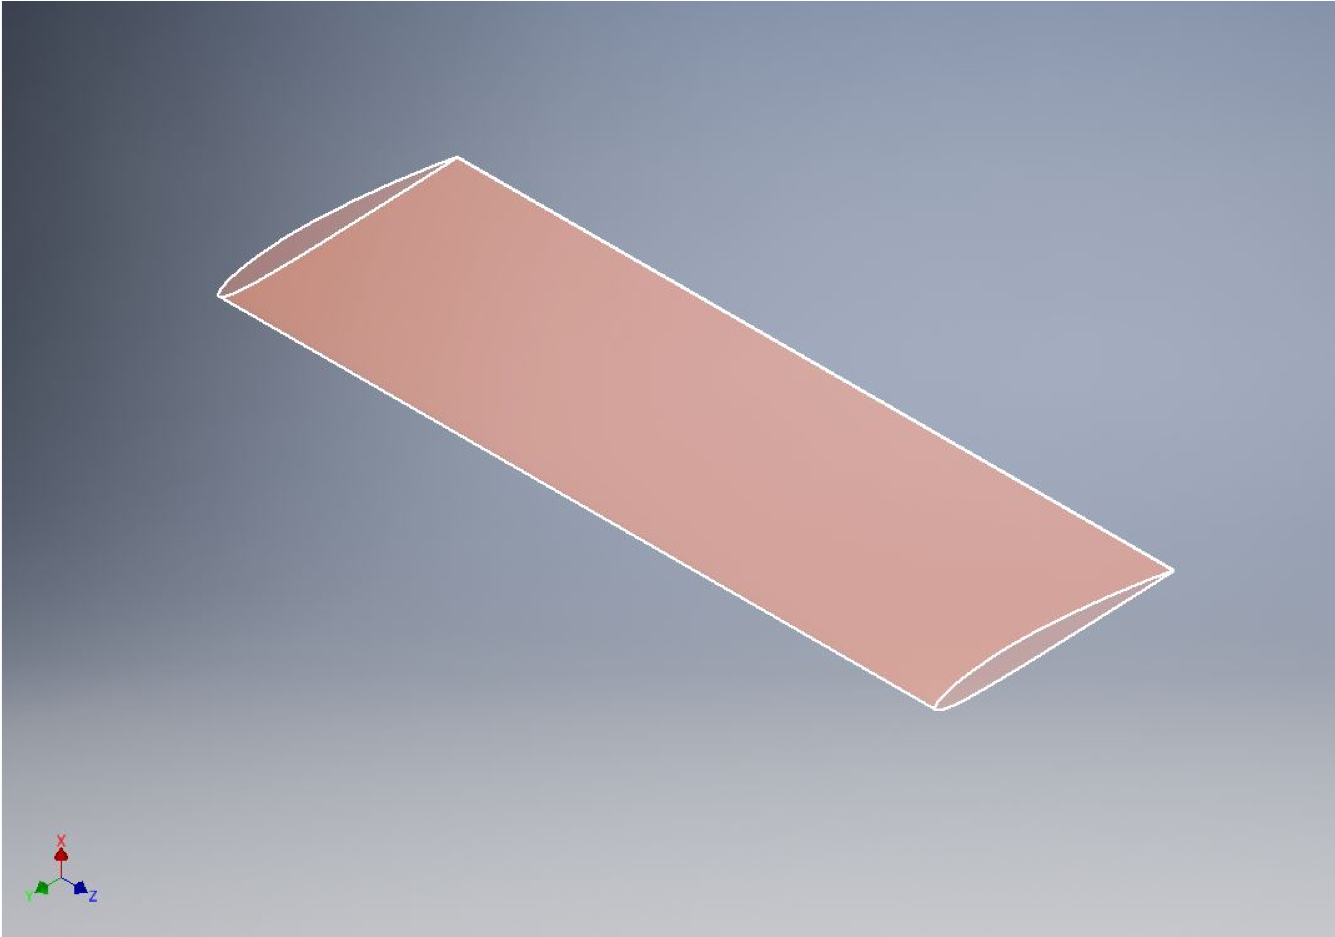 Airfoil Naca 2410.png